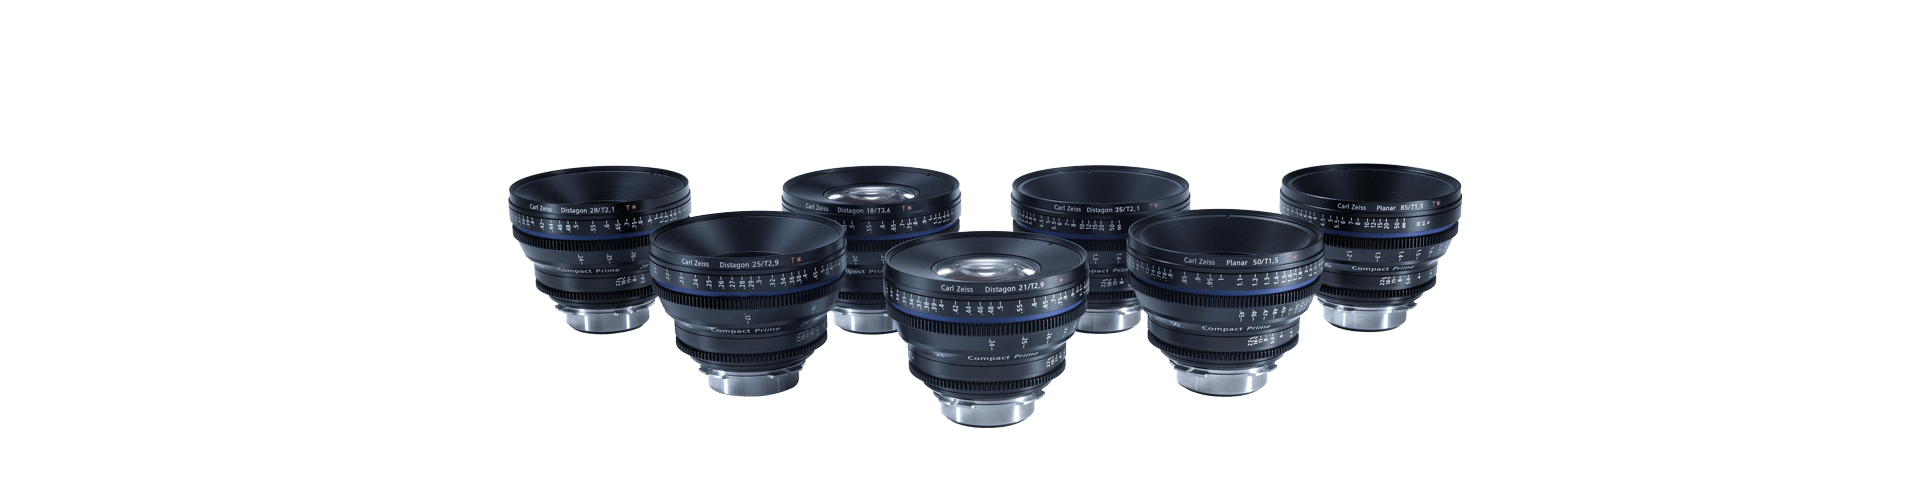 Zeiss CP.2 EF/PL SS 50mm T1.5